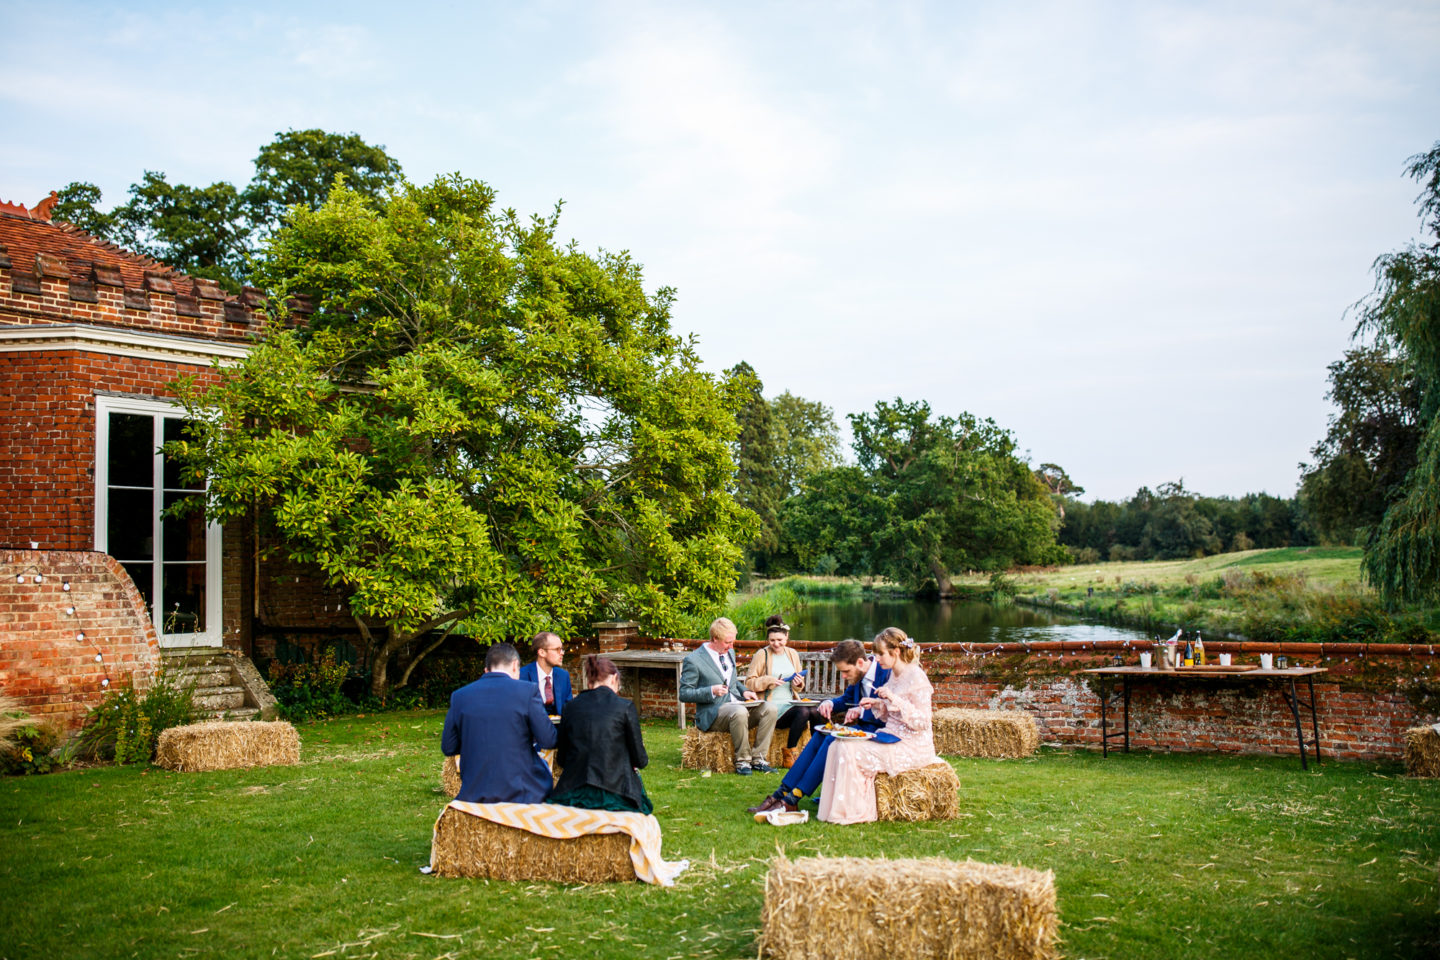 An Intimate and Ethical Civil Partnership At Boxted Hall, Suffolk